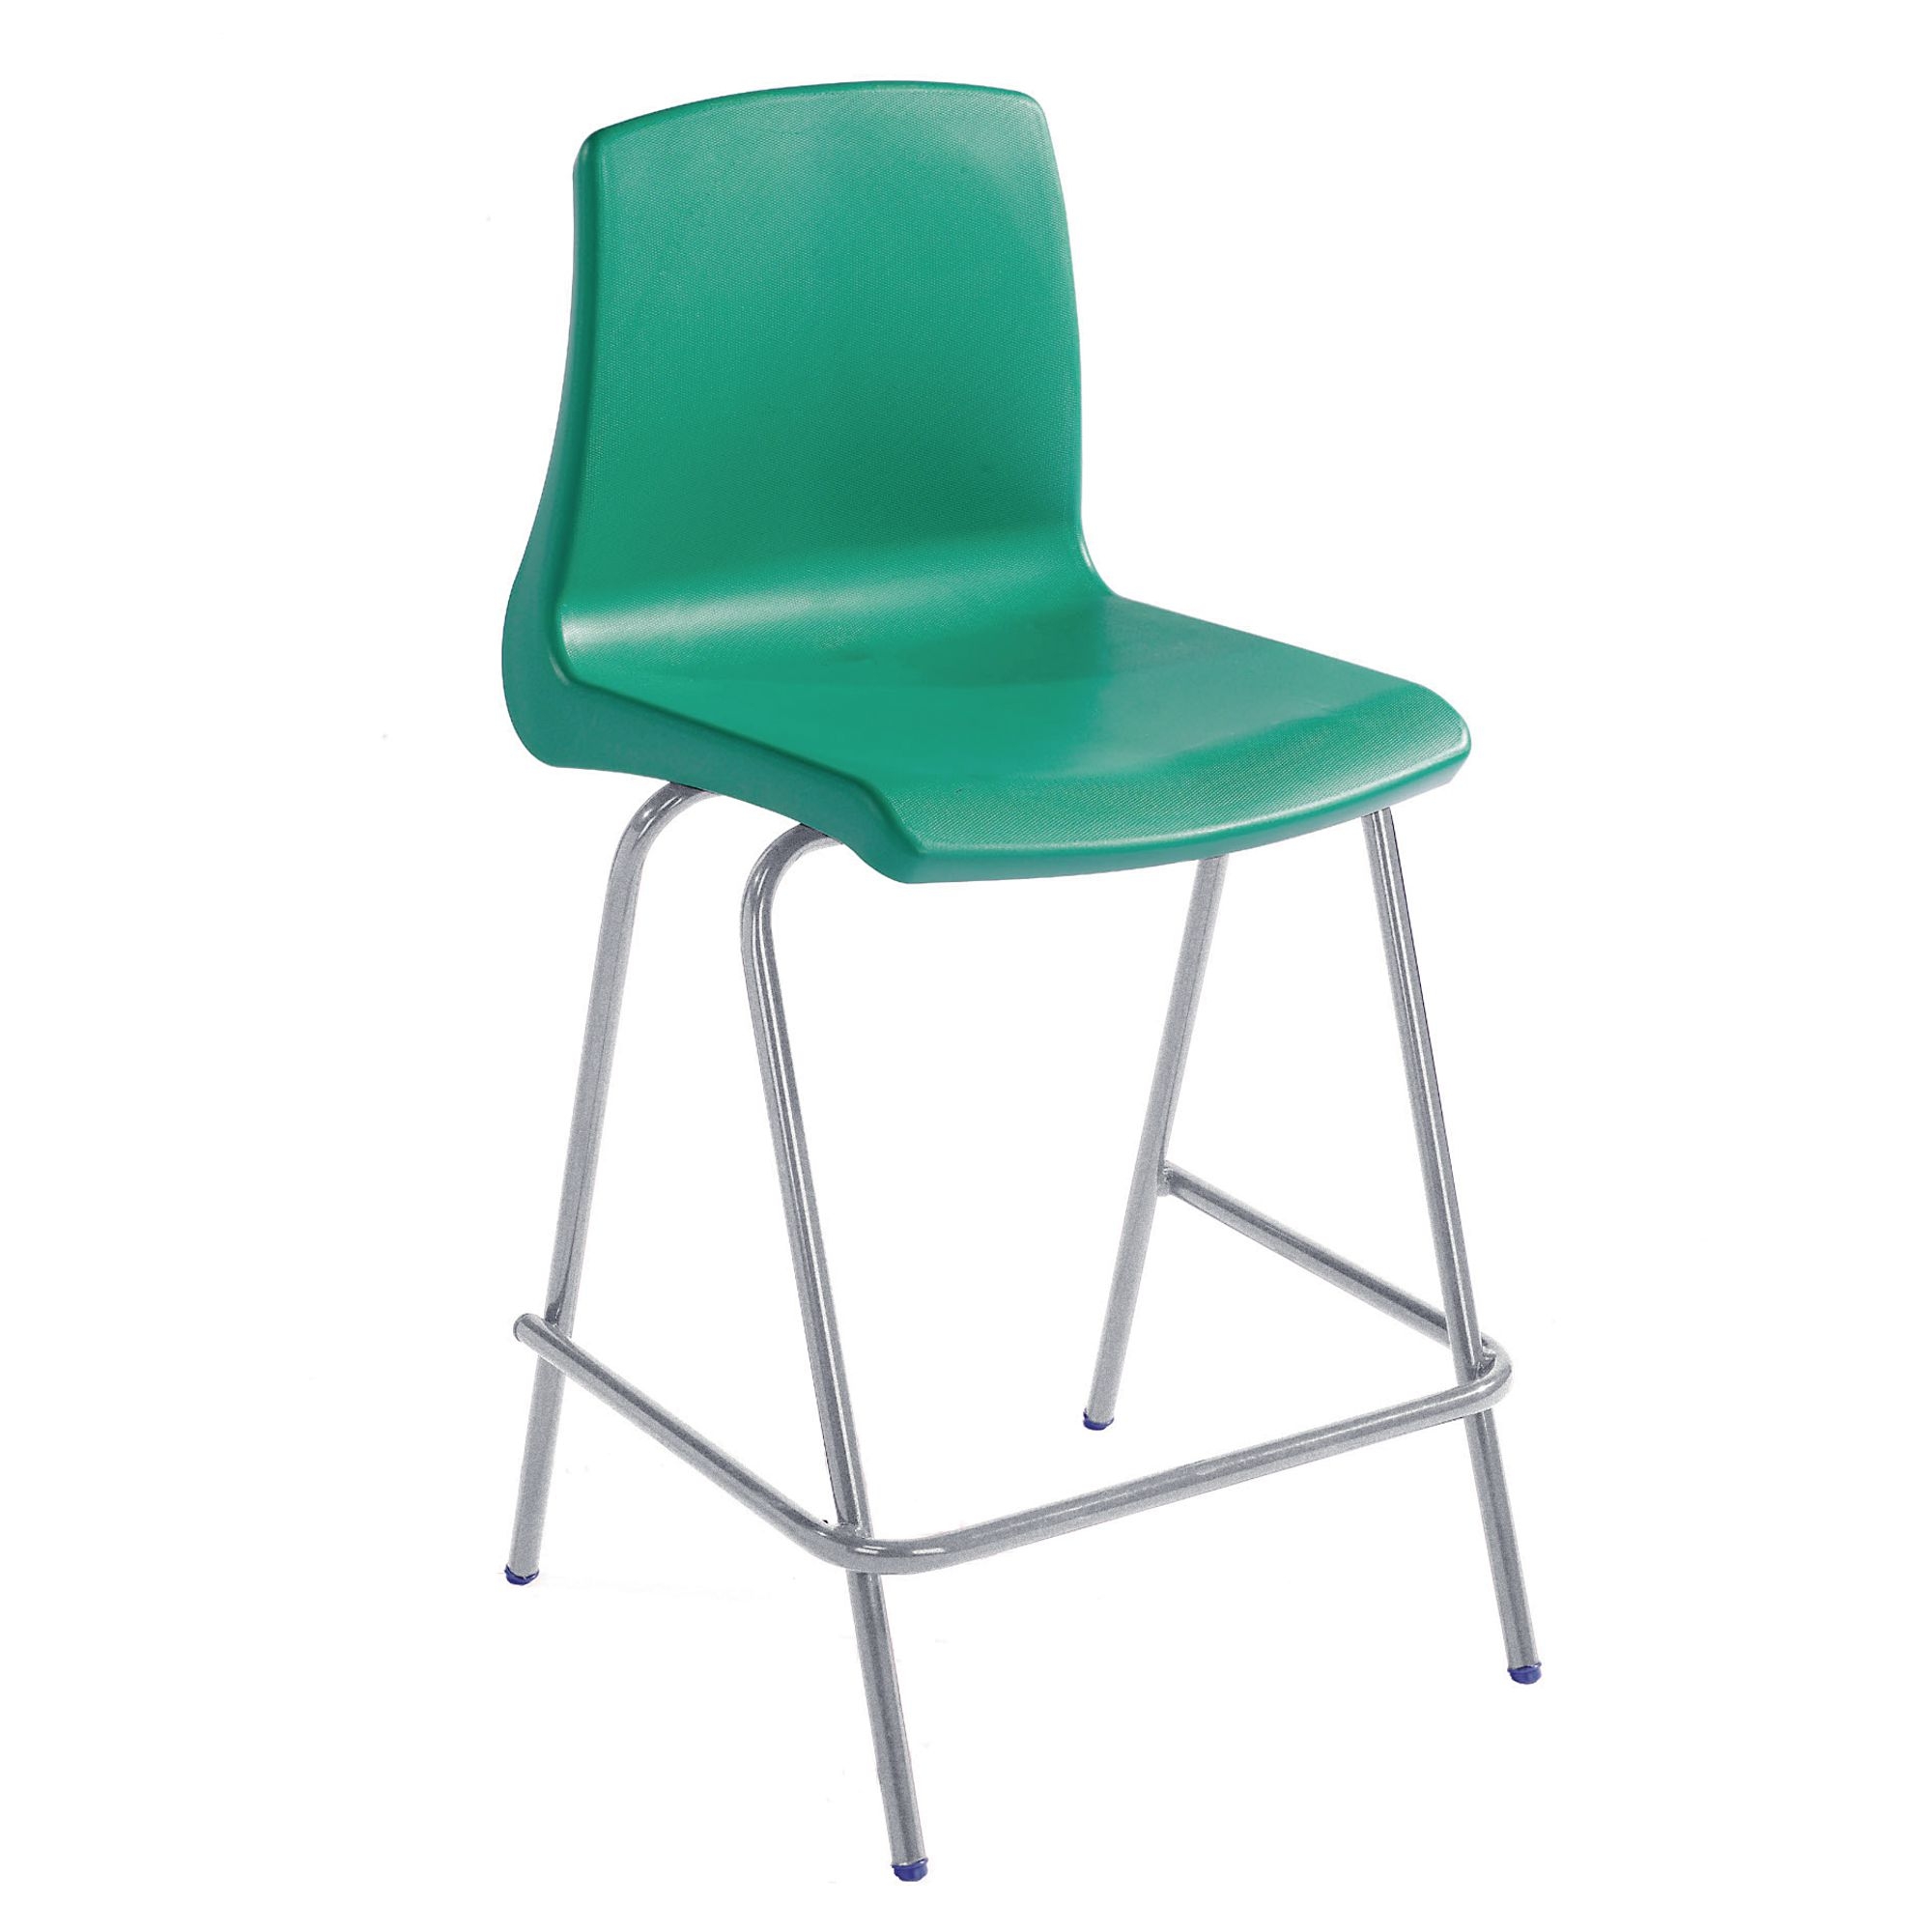 NP Stool - Seat height: 610mm - Green